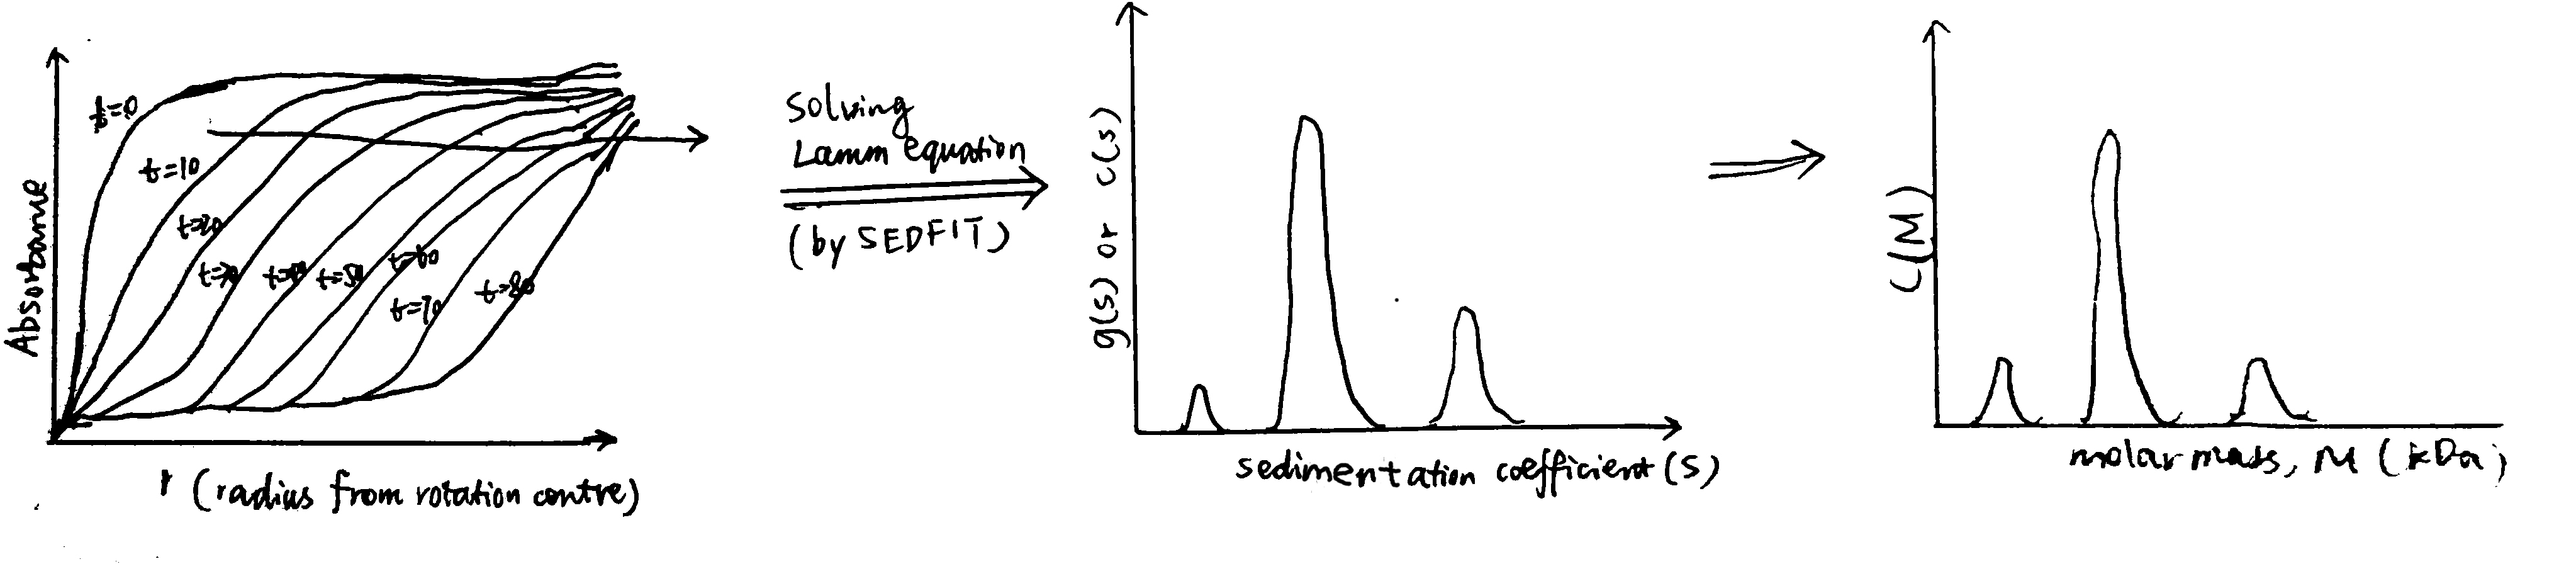 Schematic of data processing in SV experiments. The raw data collected is a series of curves recorded at fixed intervals, each showing the variation of the absorbance with the distance from the rotation centre. By solving the Lamm equation, this is transformed to a *g(s)* vs. *s* plot, or *c(s)* vs. *s* plot if it is denoised by SEDFIT. It can be further transformed into a *c(M)* vs. M plot (distribution of molecular weights), assuming constant frictional ratio $f/f_o$